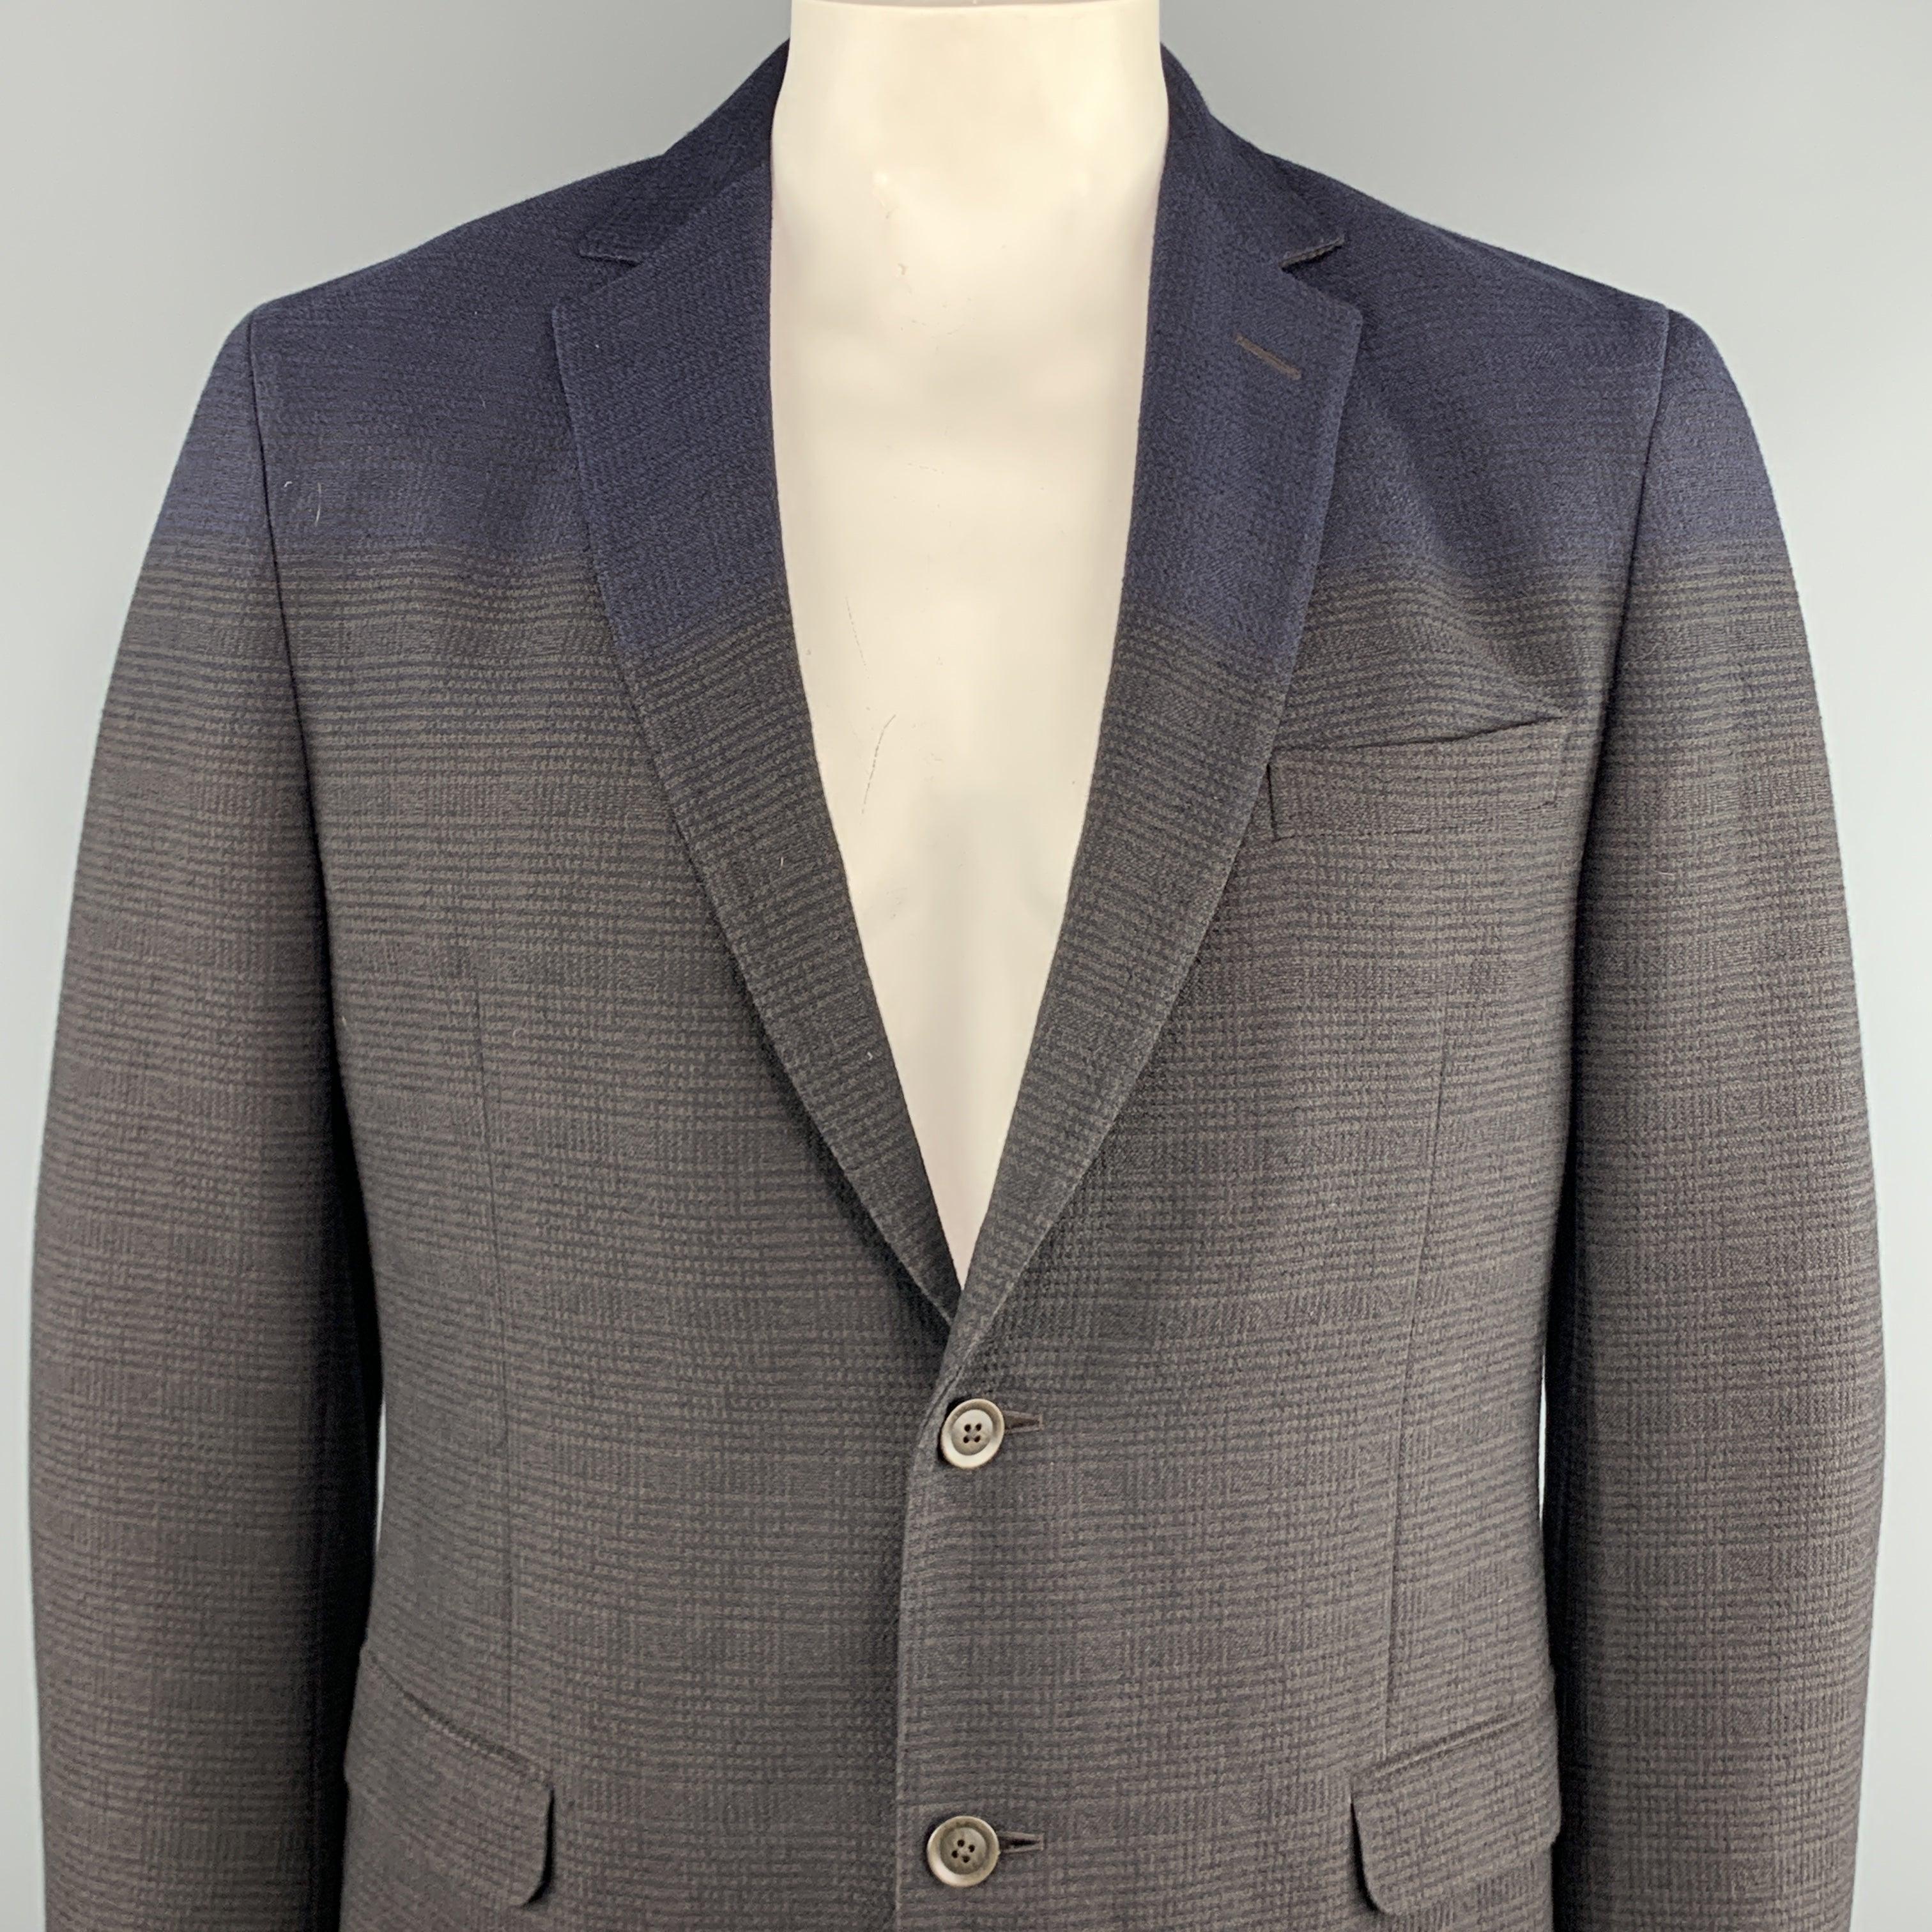 Z ZEGNA Sport Coat comes in a brown & navy plaid cotton / wool featuring a notch lapel, ombre effect, flap pockets, and a two button closure.
Excellent
Pre-Owned Condition. 

Marked:   54 R 

Measurements: 
 
Shoulder: 19 inches 
Chest: 44 inches